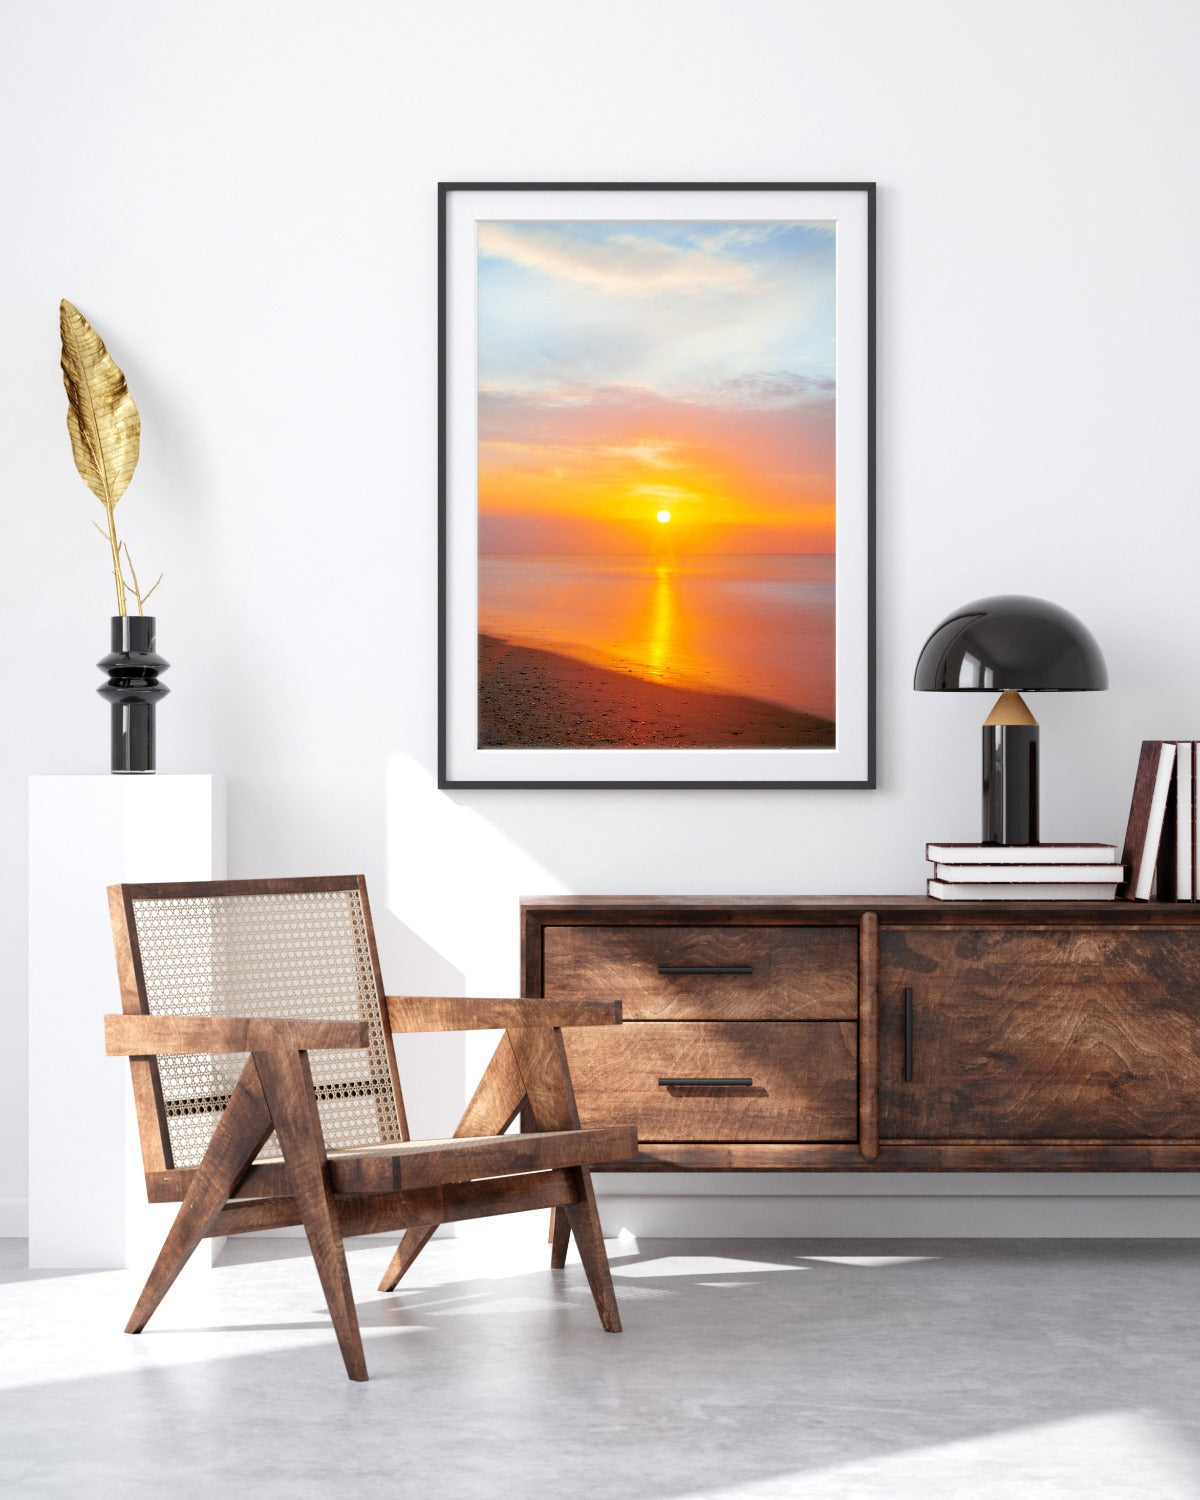 Mid-Century Modern Minimalist Decor, featuring black frame colorful beach photograph by Wright and Roam